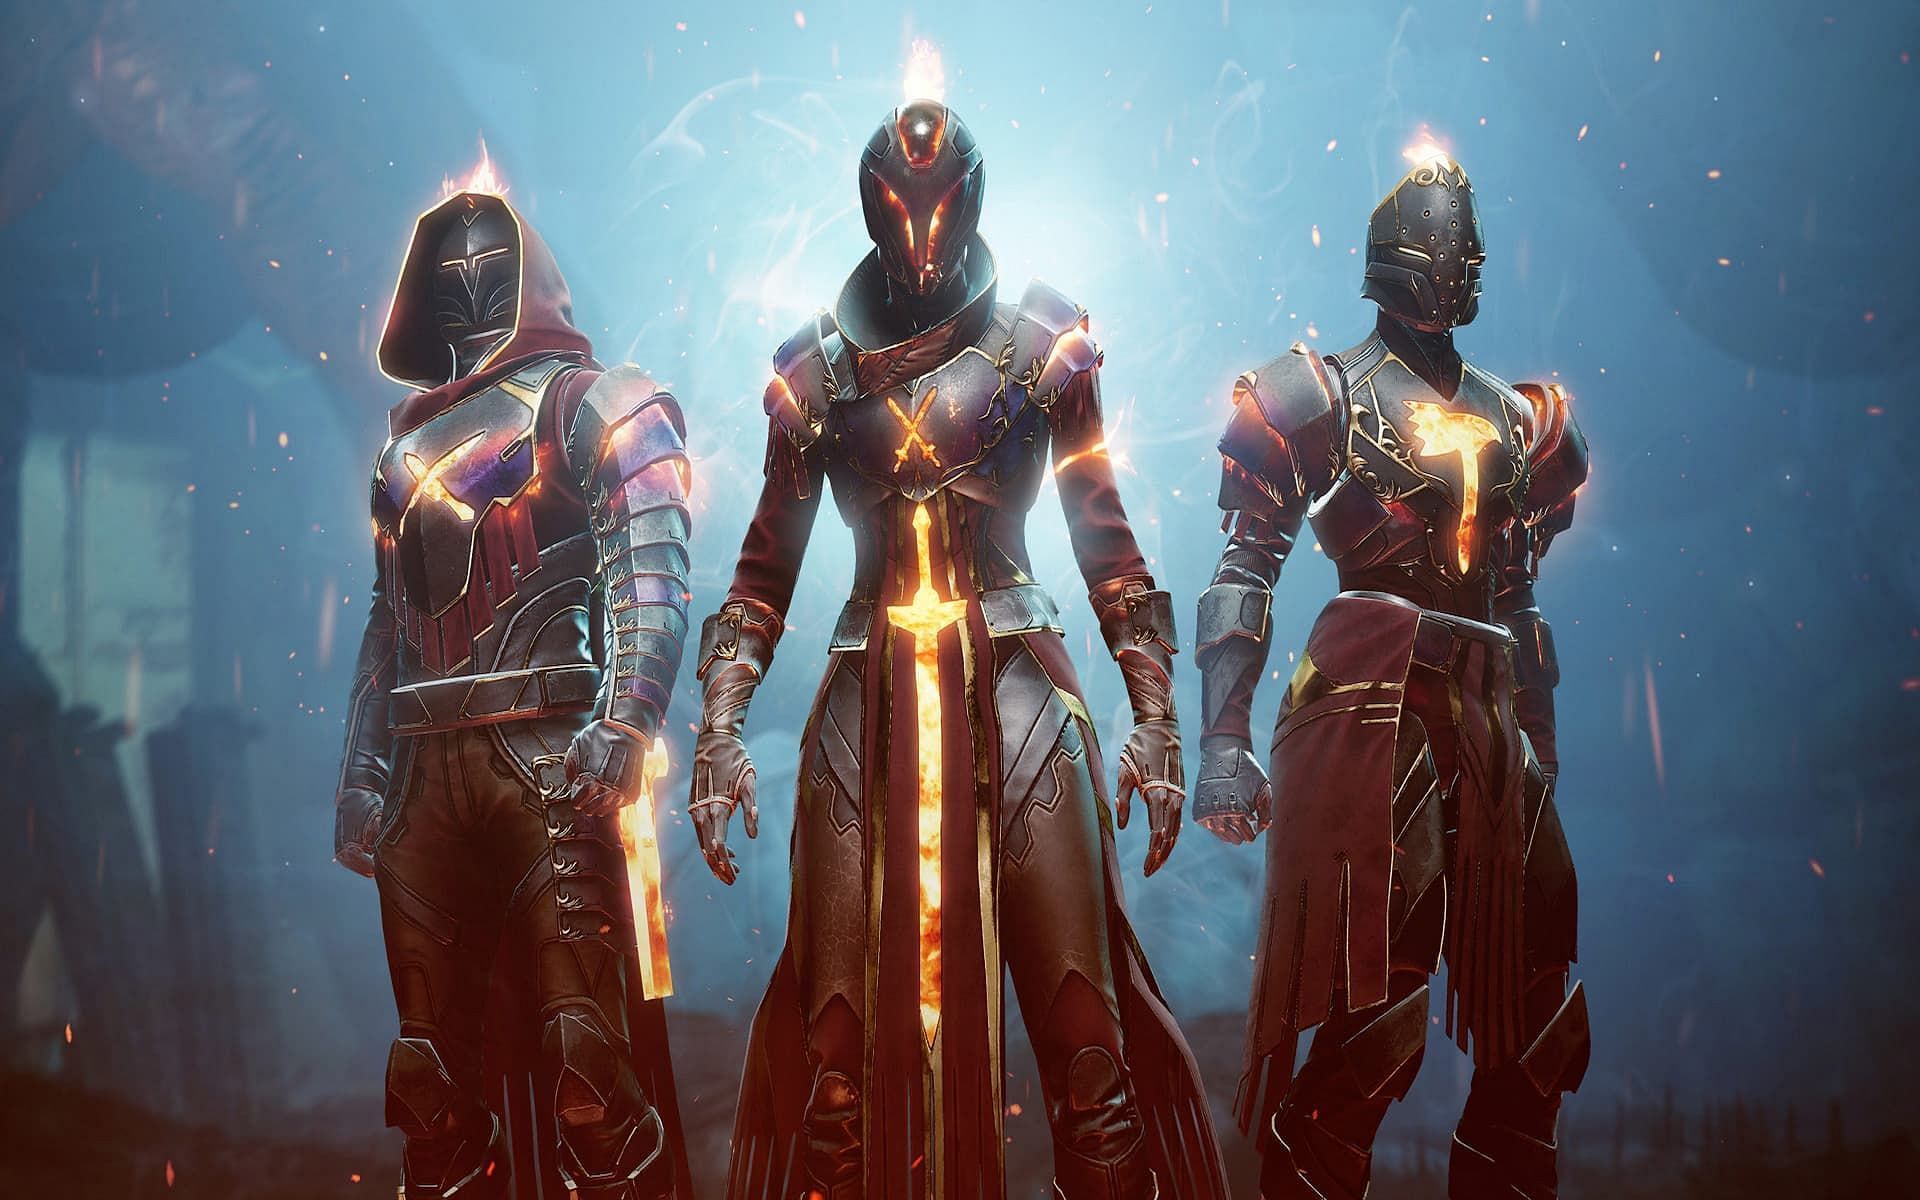 Solar 3.0 introduced some changes to the different subclasses of Destiny 2 (Image via Bungie)